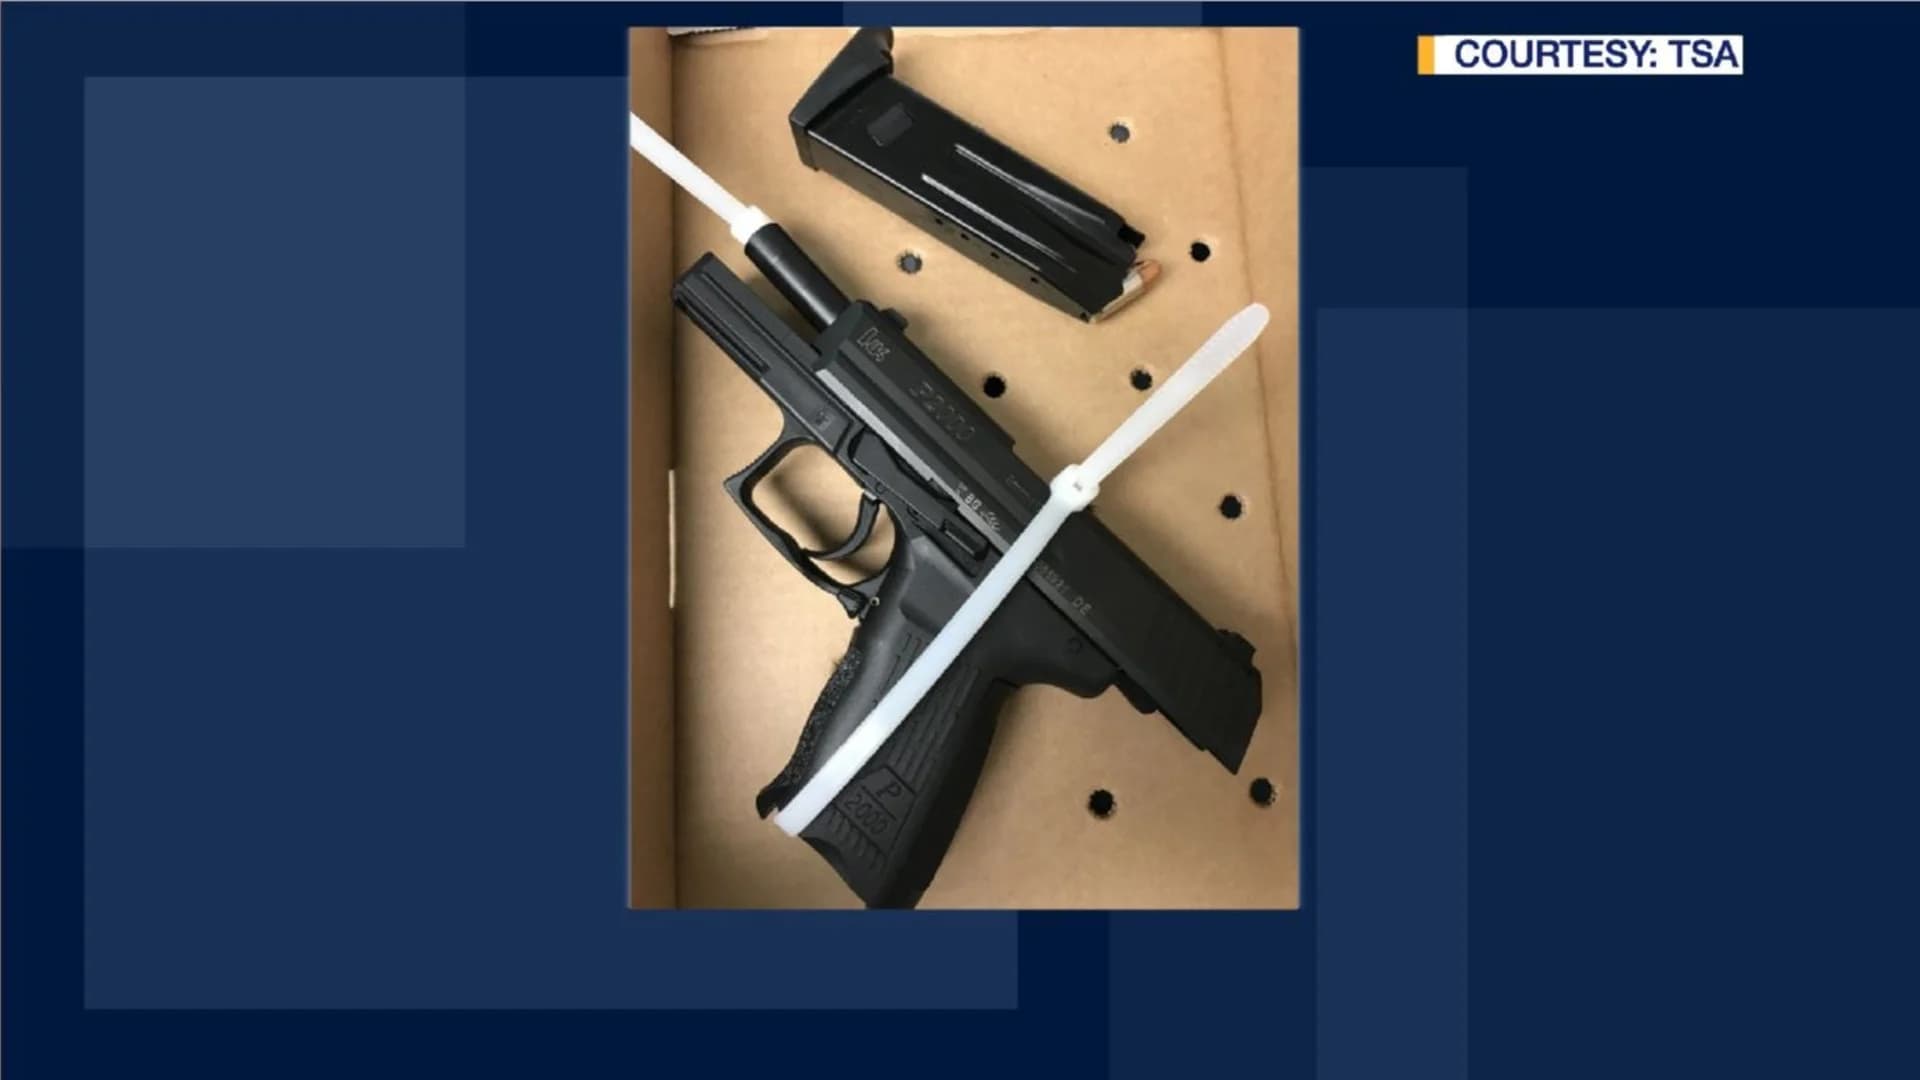 Man charged after loaded gun found in luggage at Newark airport